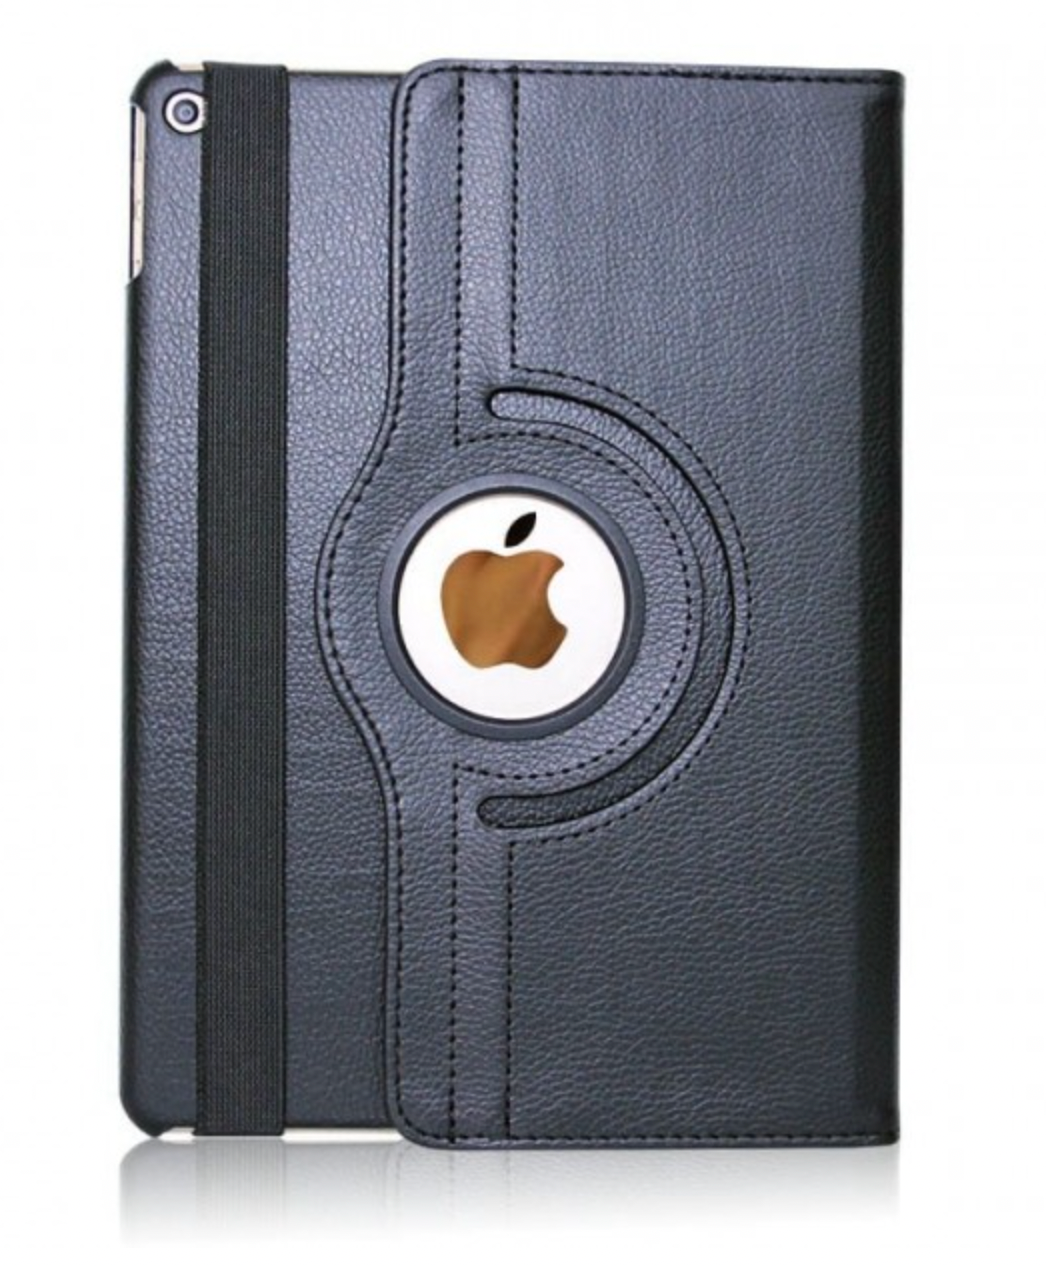 Kickstand Book Case for iPad 4/3/2 - Black *Free Shipping*